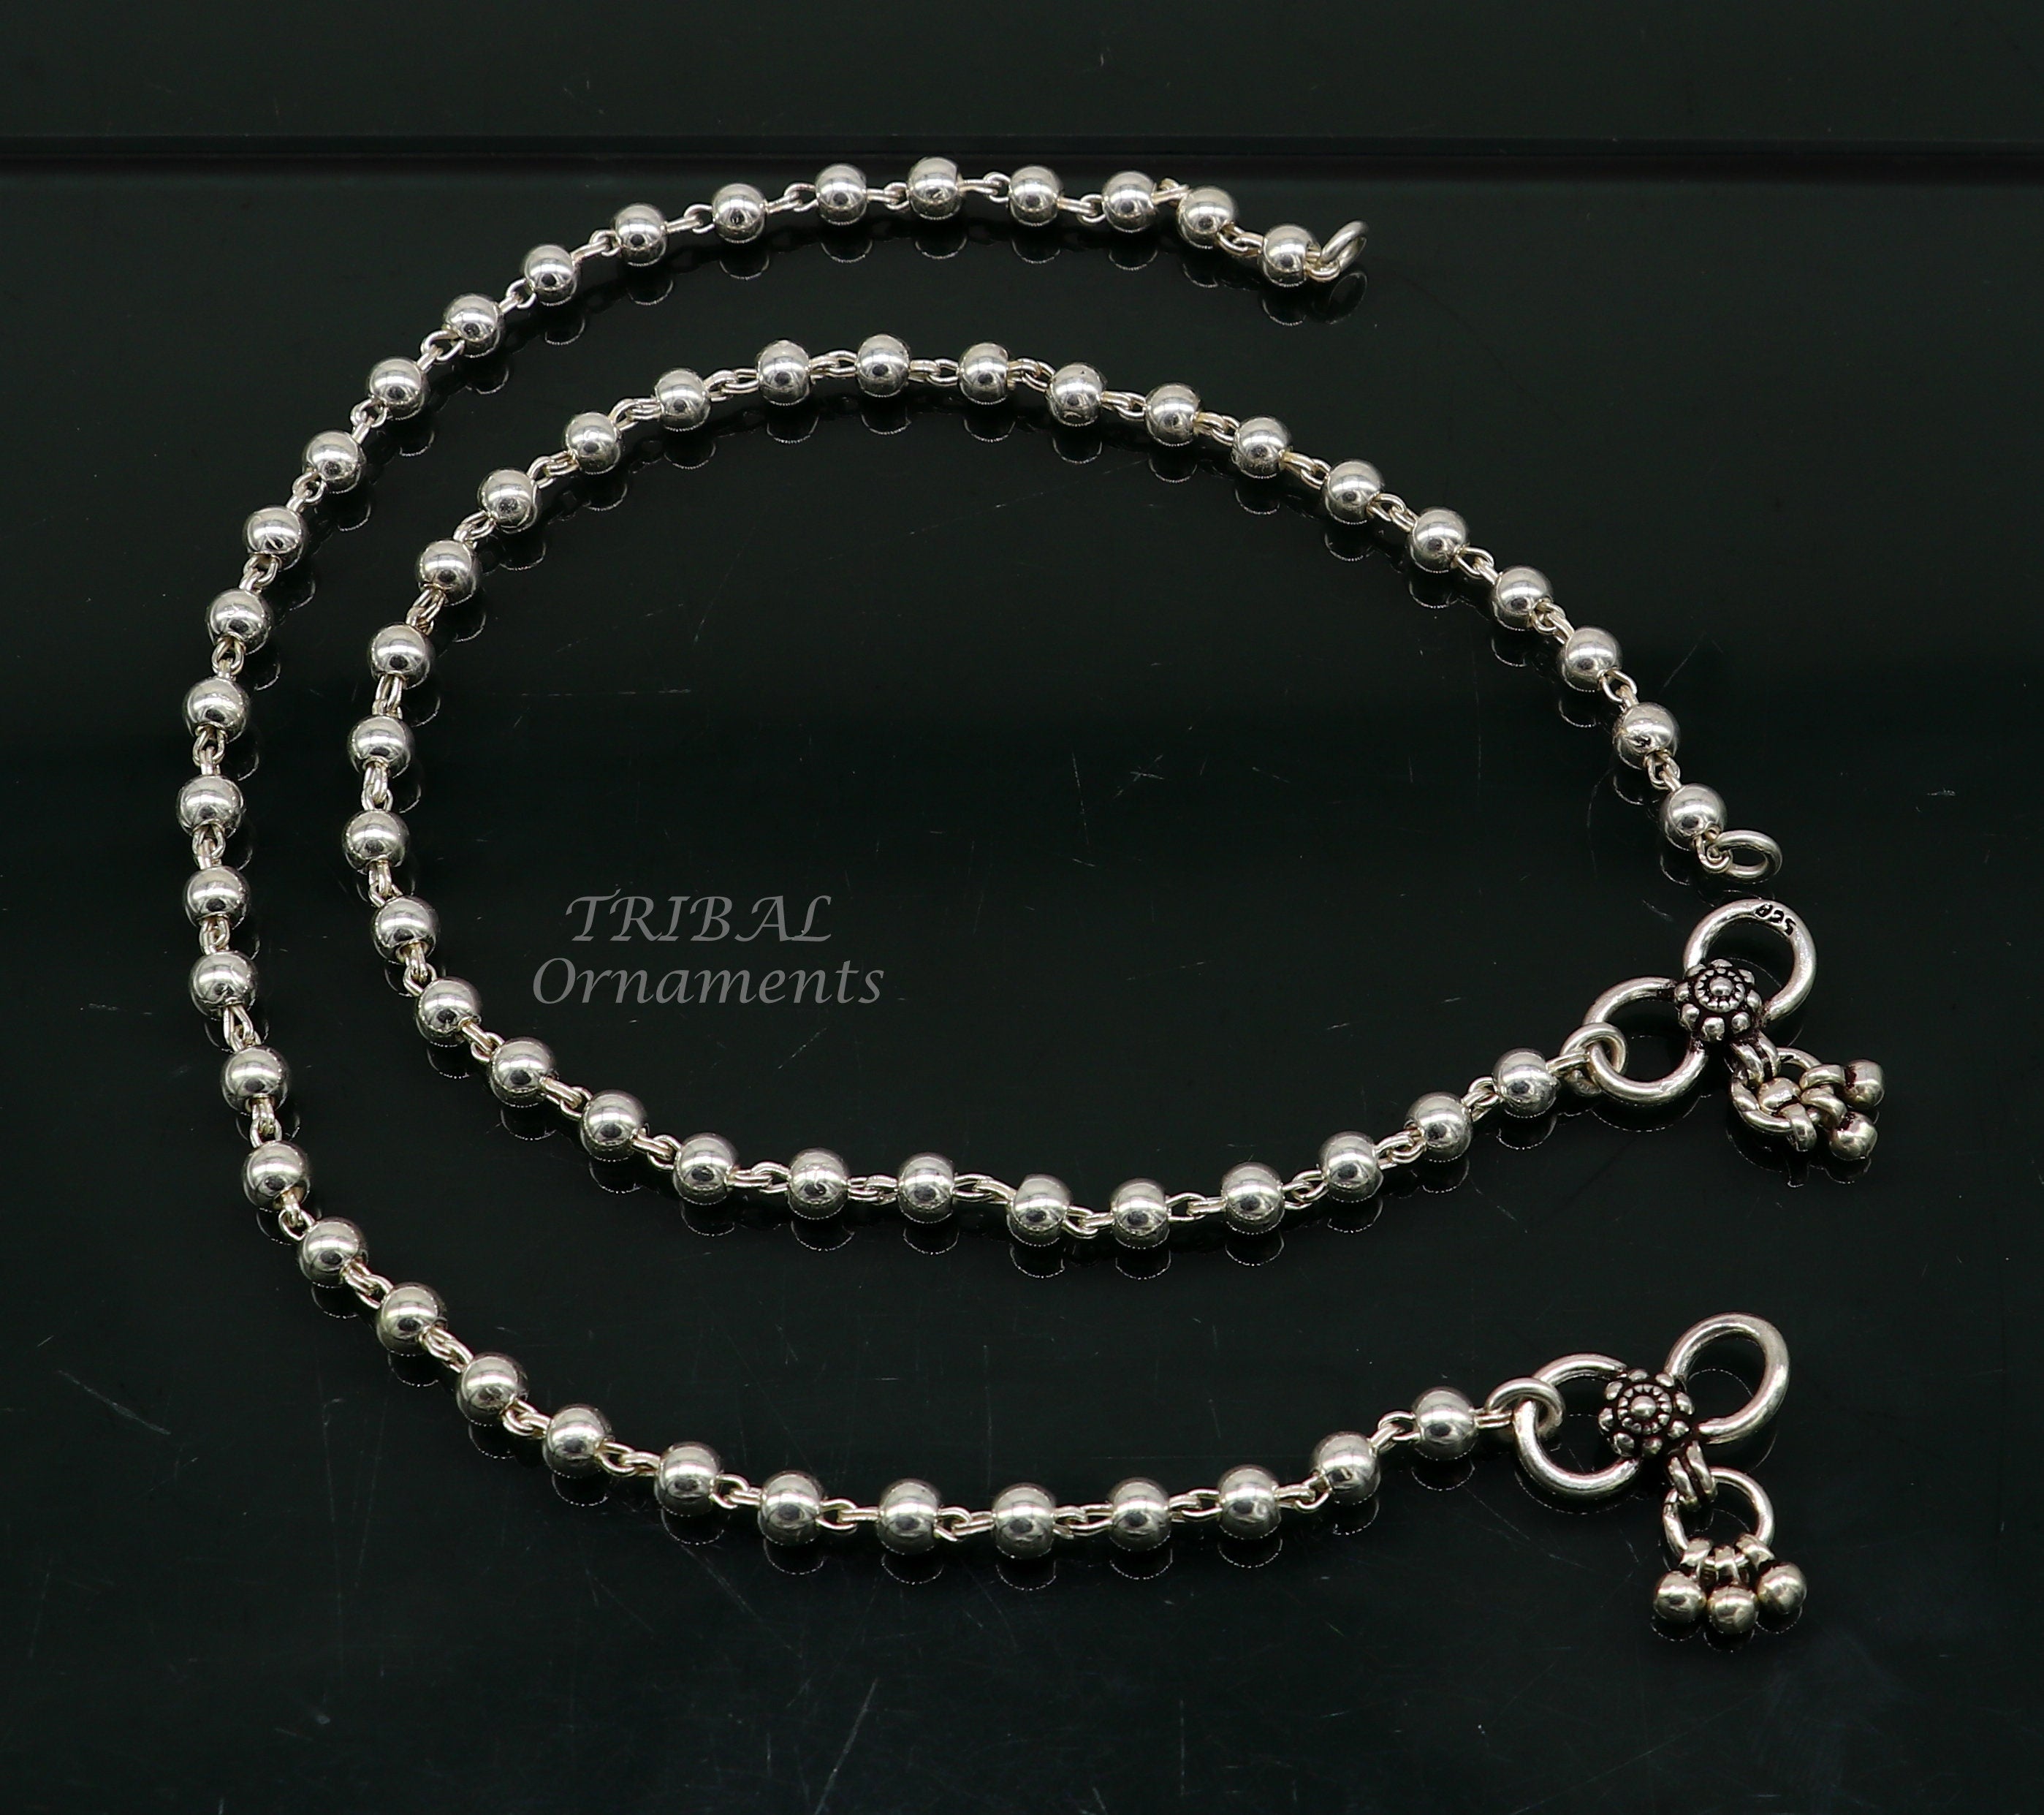 2.4mm Stainless Steel Beaded Chain Necklace - The Black Bow Jewelry Company